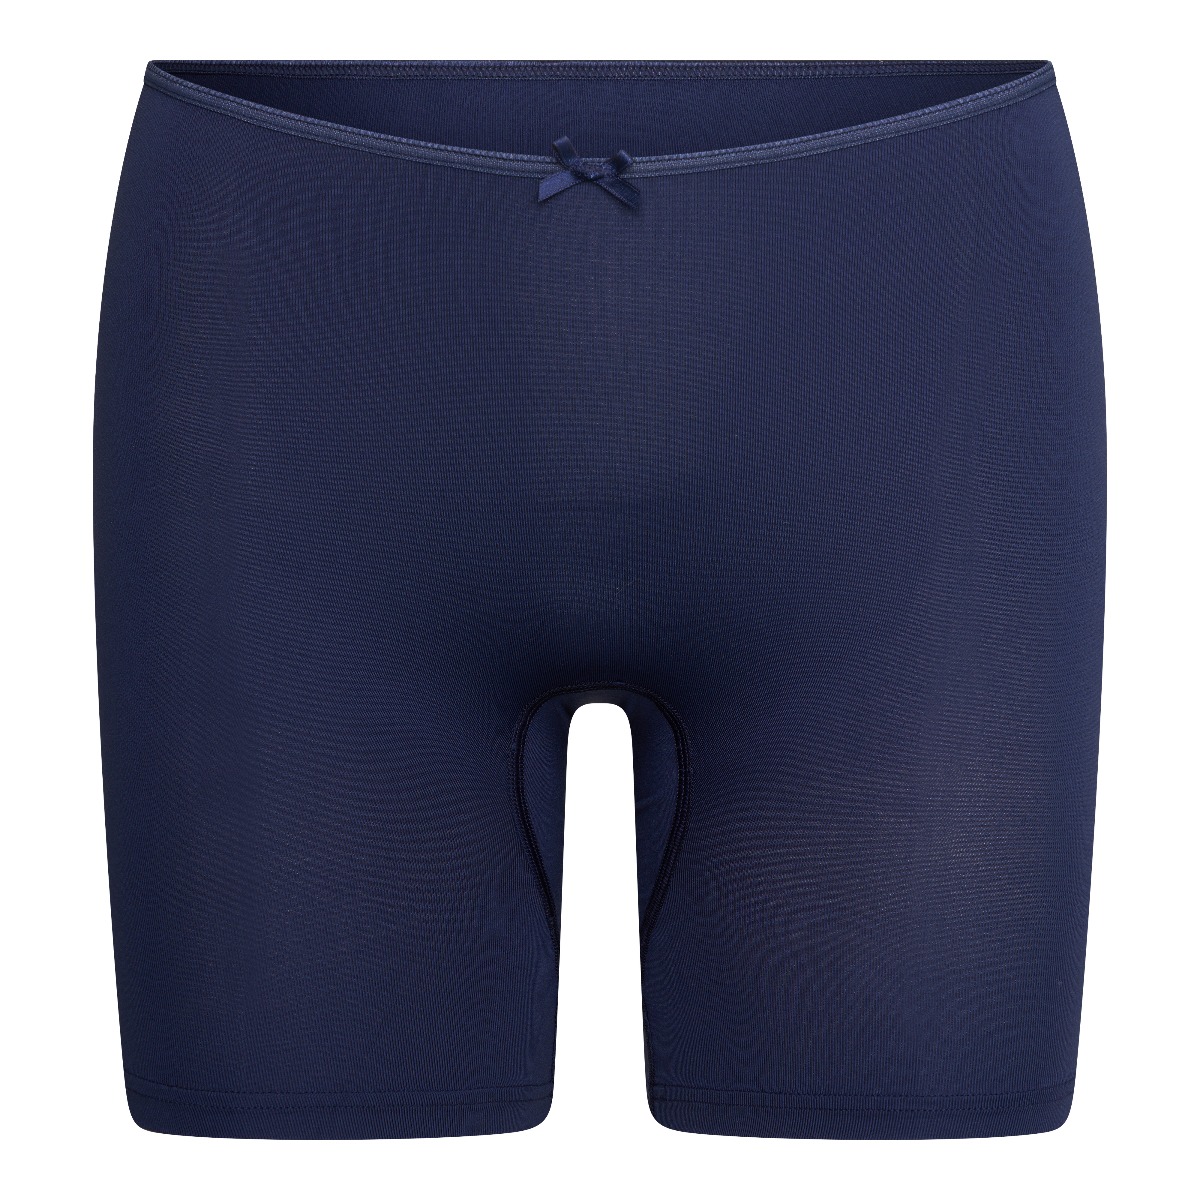 RJ Pure Color Dames Extra Lange Pijp Short Donkerblauw XXL